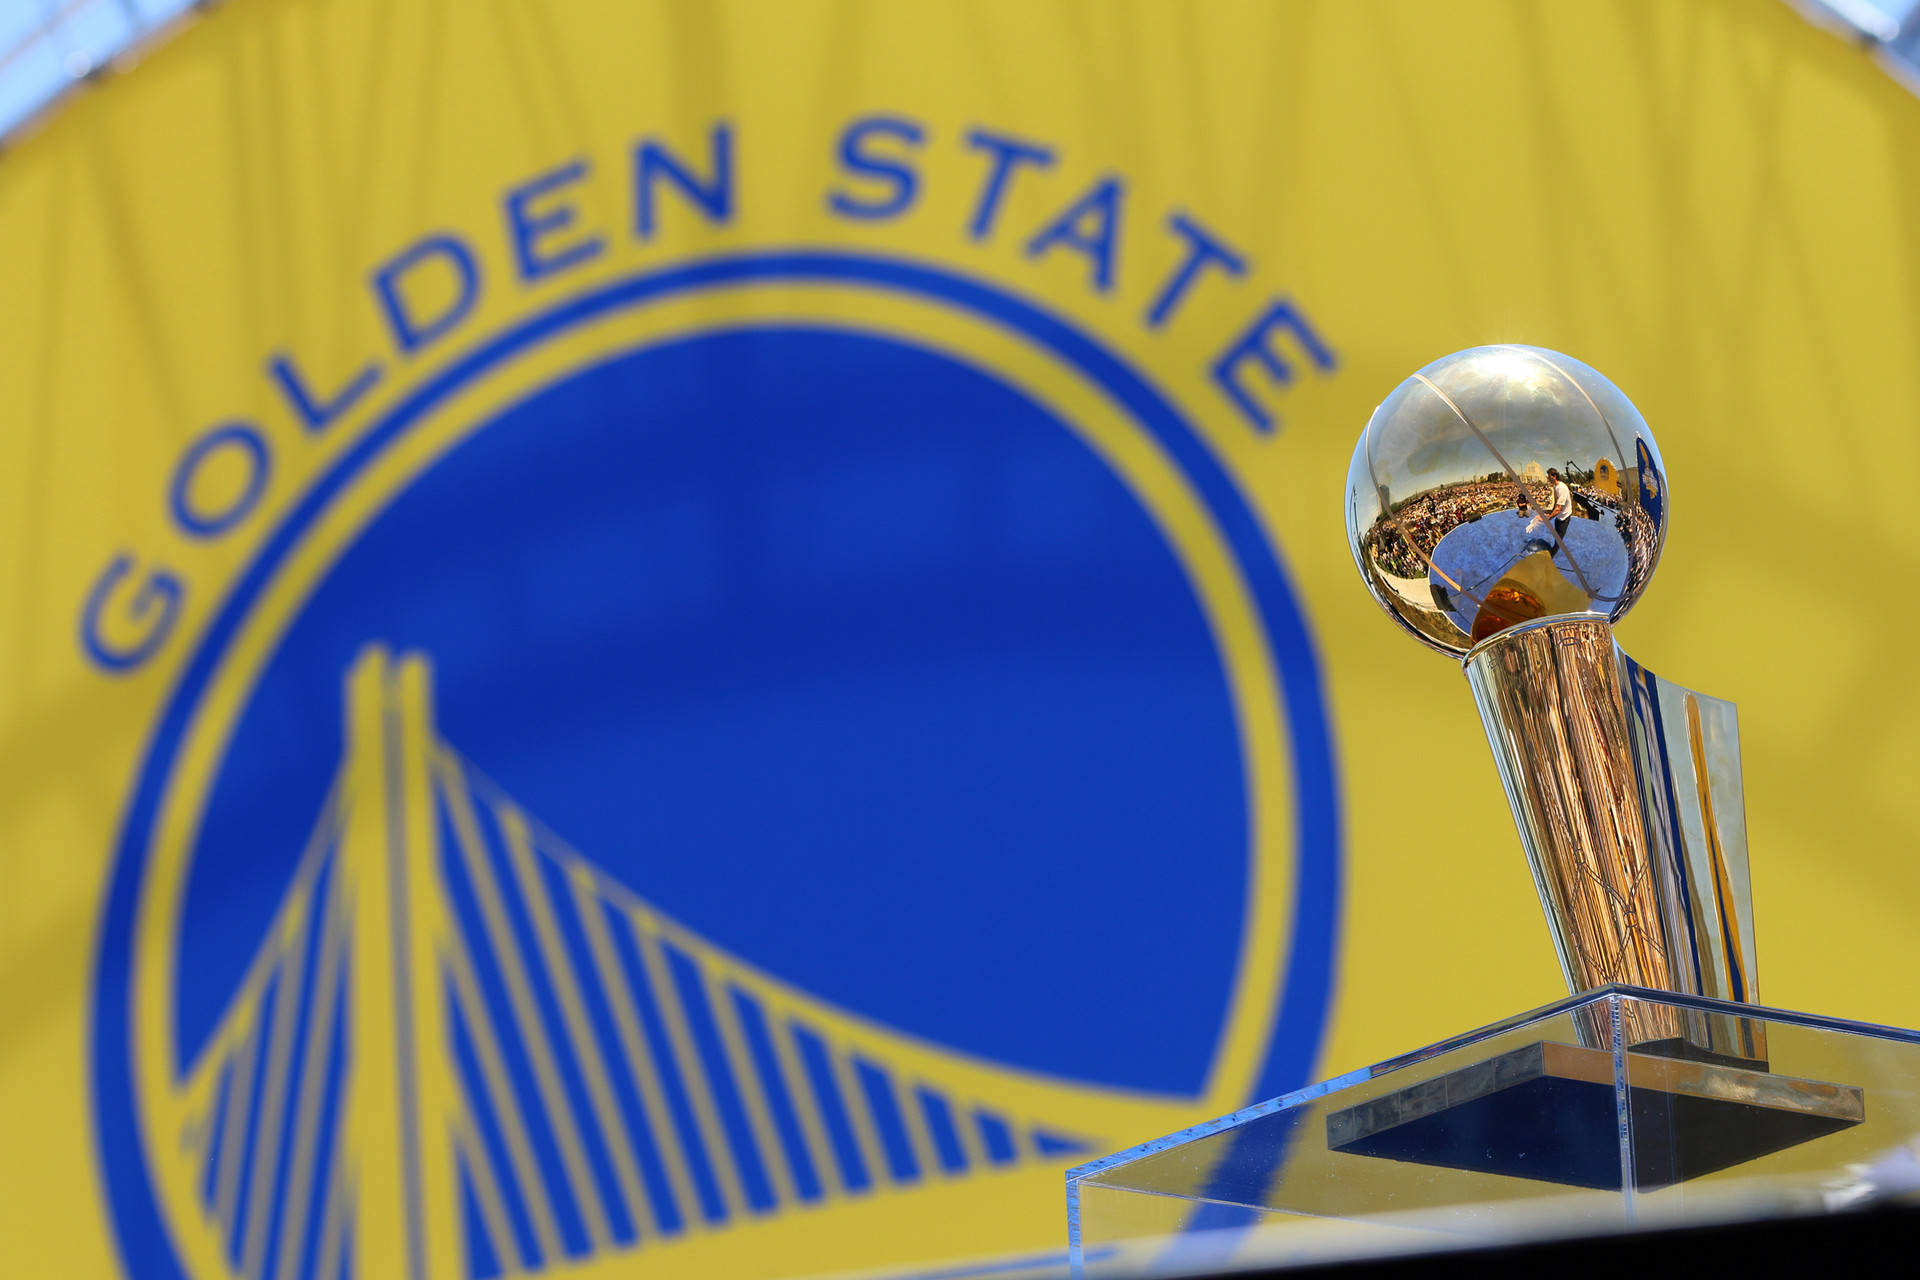 The Golden State Warriors are the only team in the NBA with a name that doesn't include a city or state. Adam Grossberg/KQED